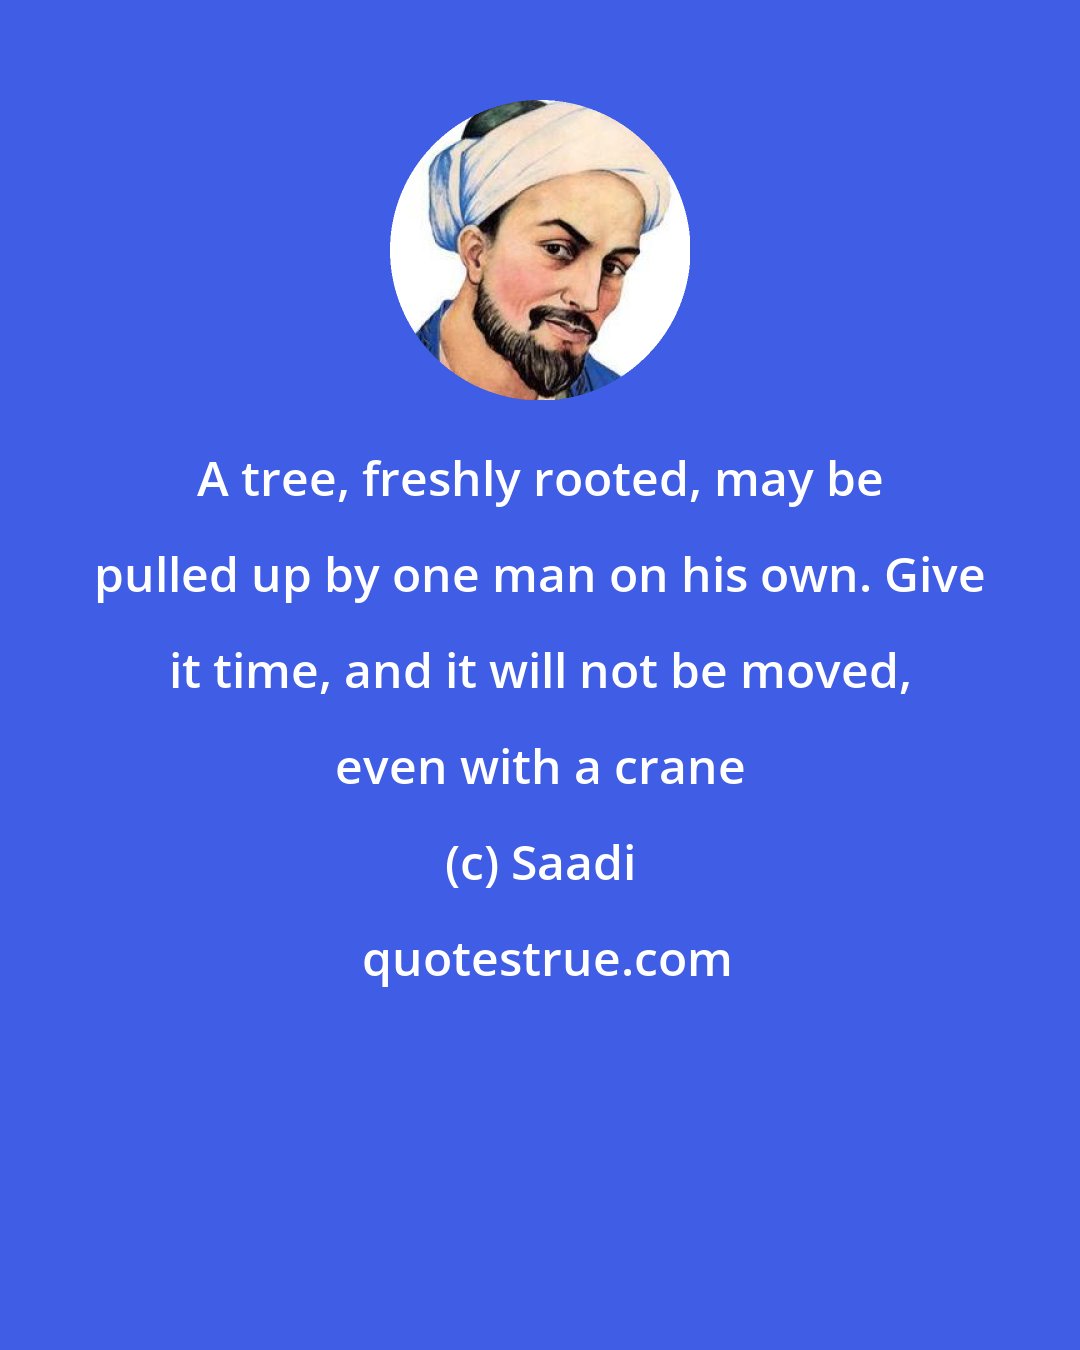 Saadi: A tree, freshly rooted, may be pulled up by one man on his own. Give it time, and it will not be moved, even with a crane